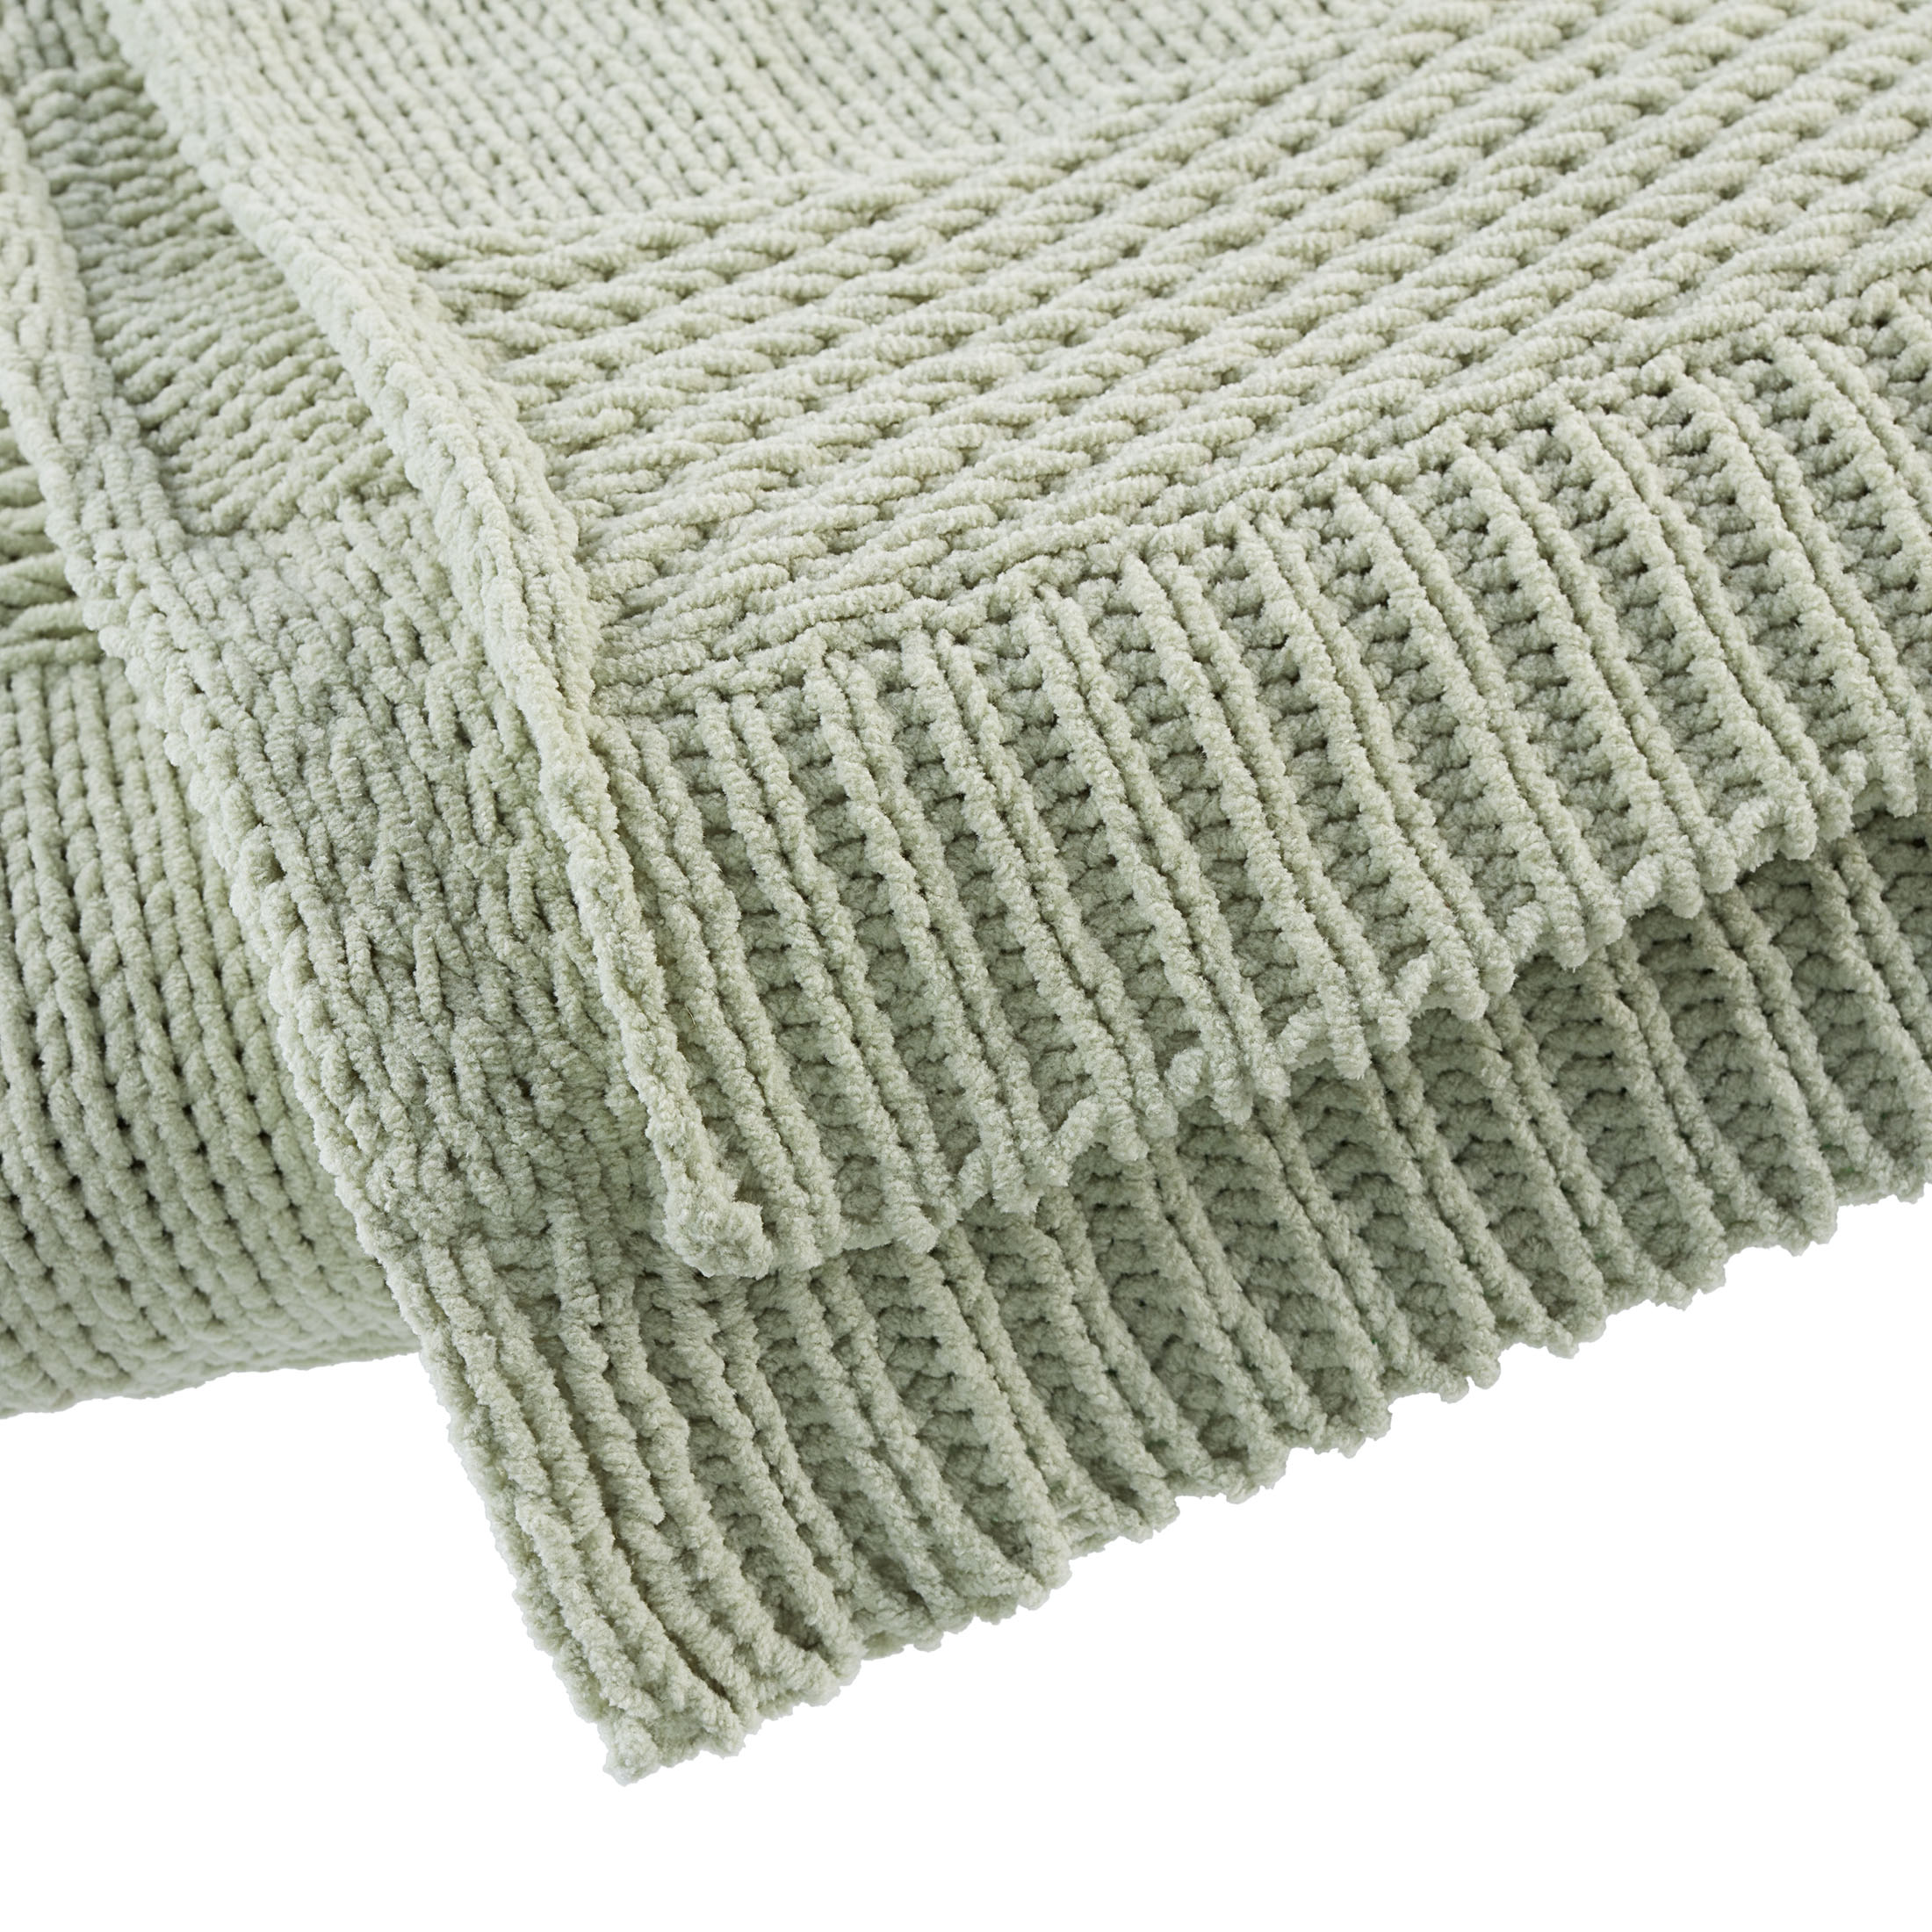 Beautiful Chenille Throw, Sage Green, 50 x 60 inches, by Drew Barrymore - image 5 of 7